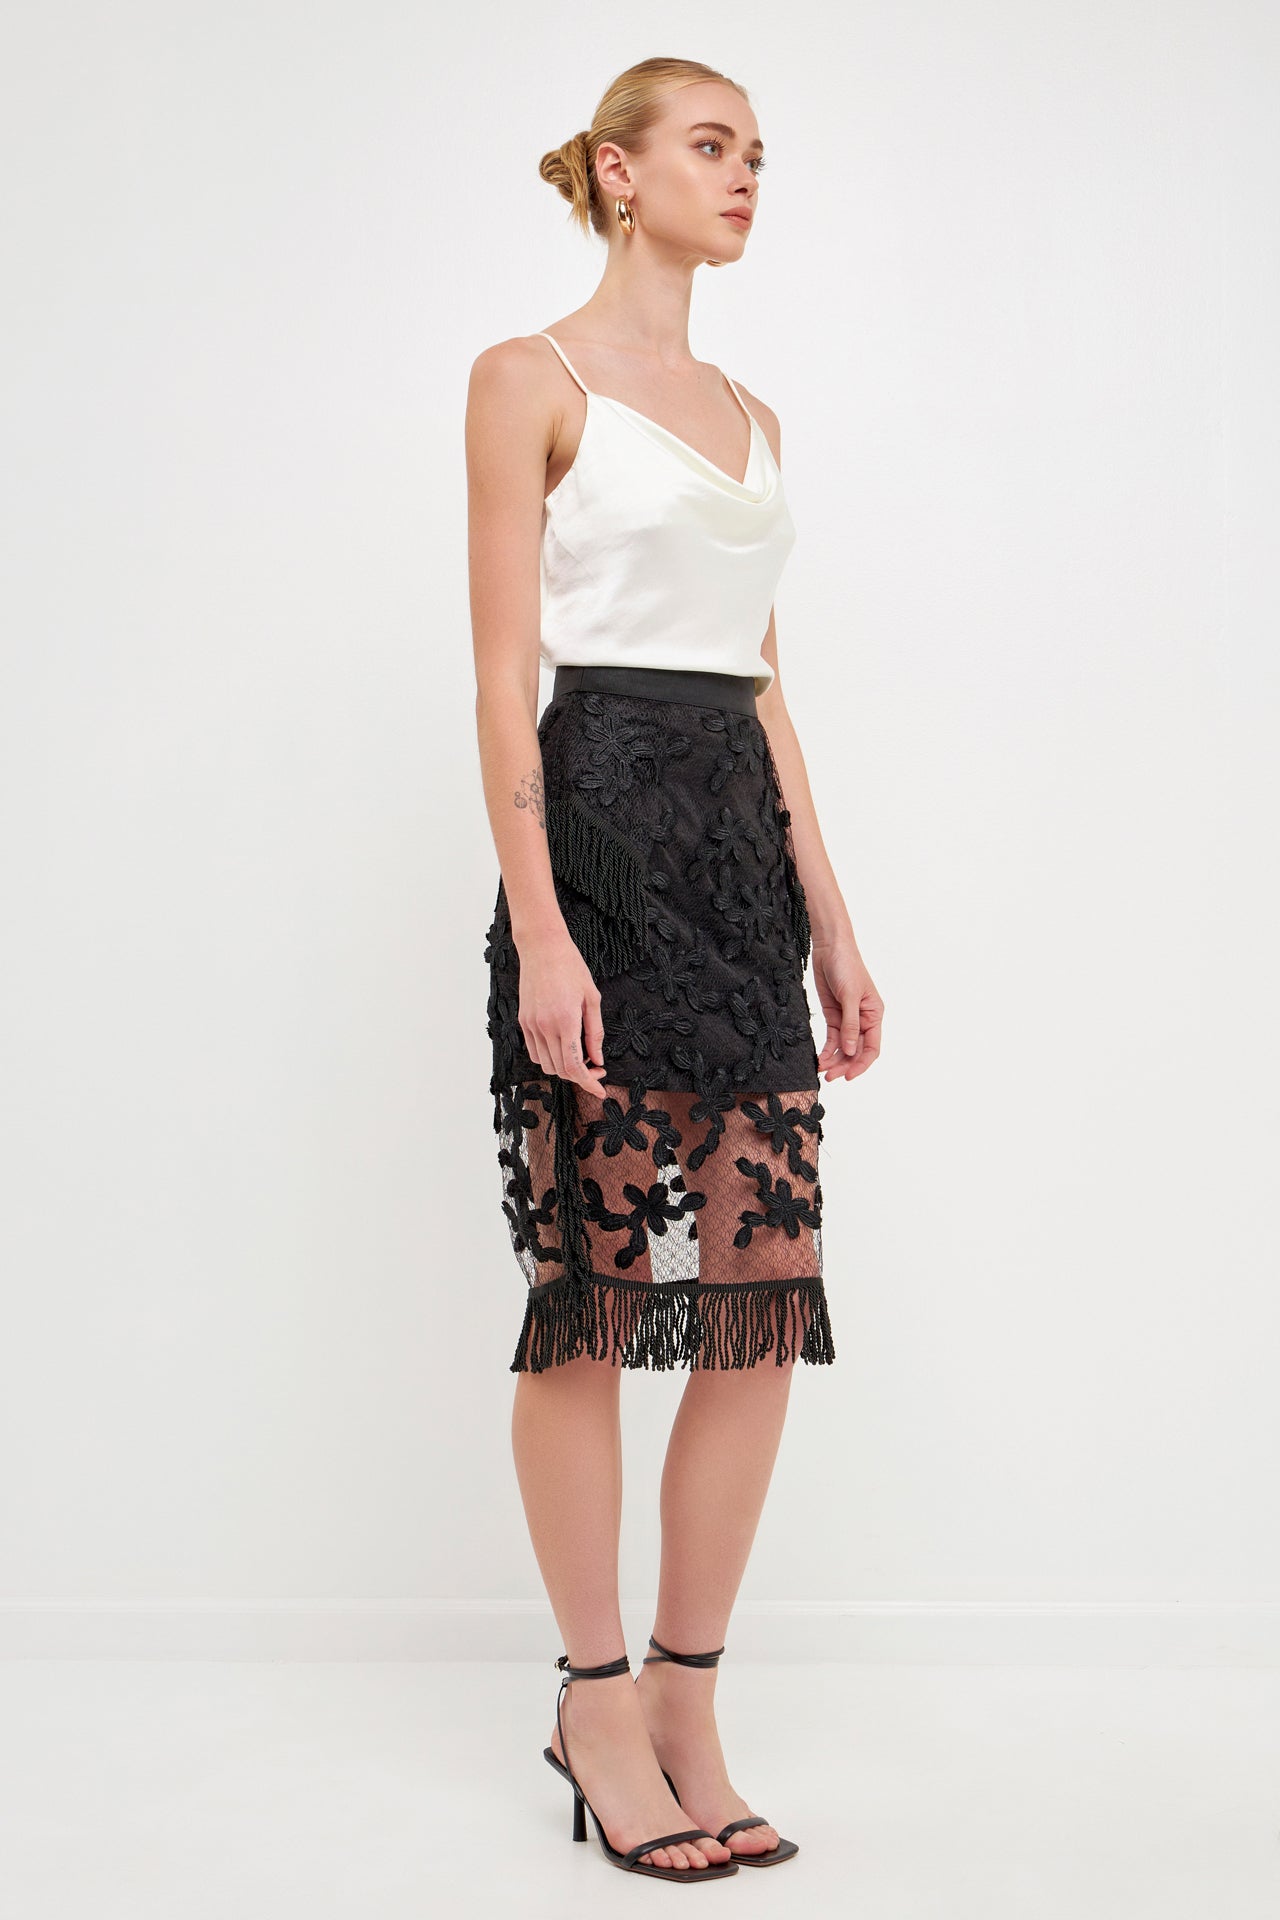 ENDLESS ROSE - Floral Lace Skirt - sale available at Objectrare